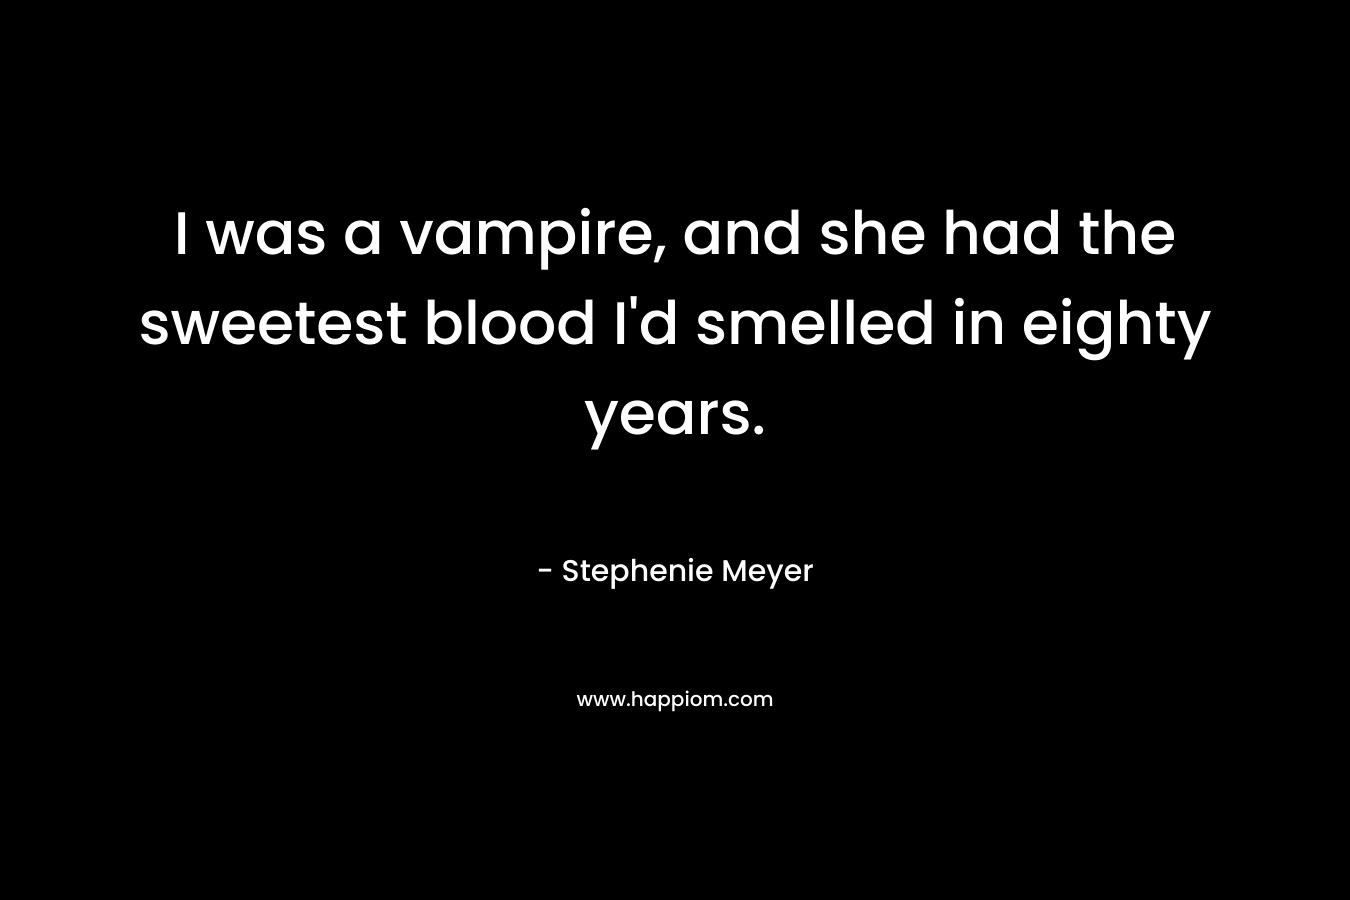 I was a vampire, and she had the sweetest blood I’d smelled in eighty years. – Stephenie Meyer